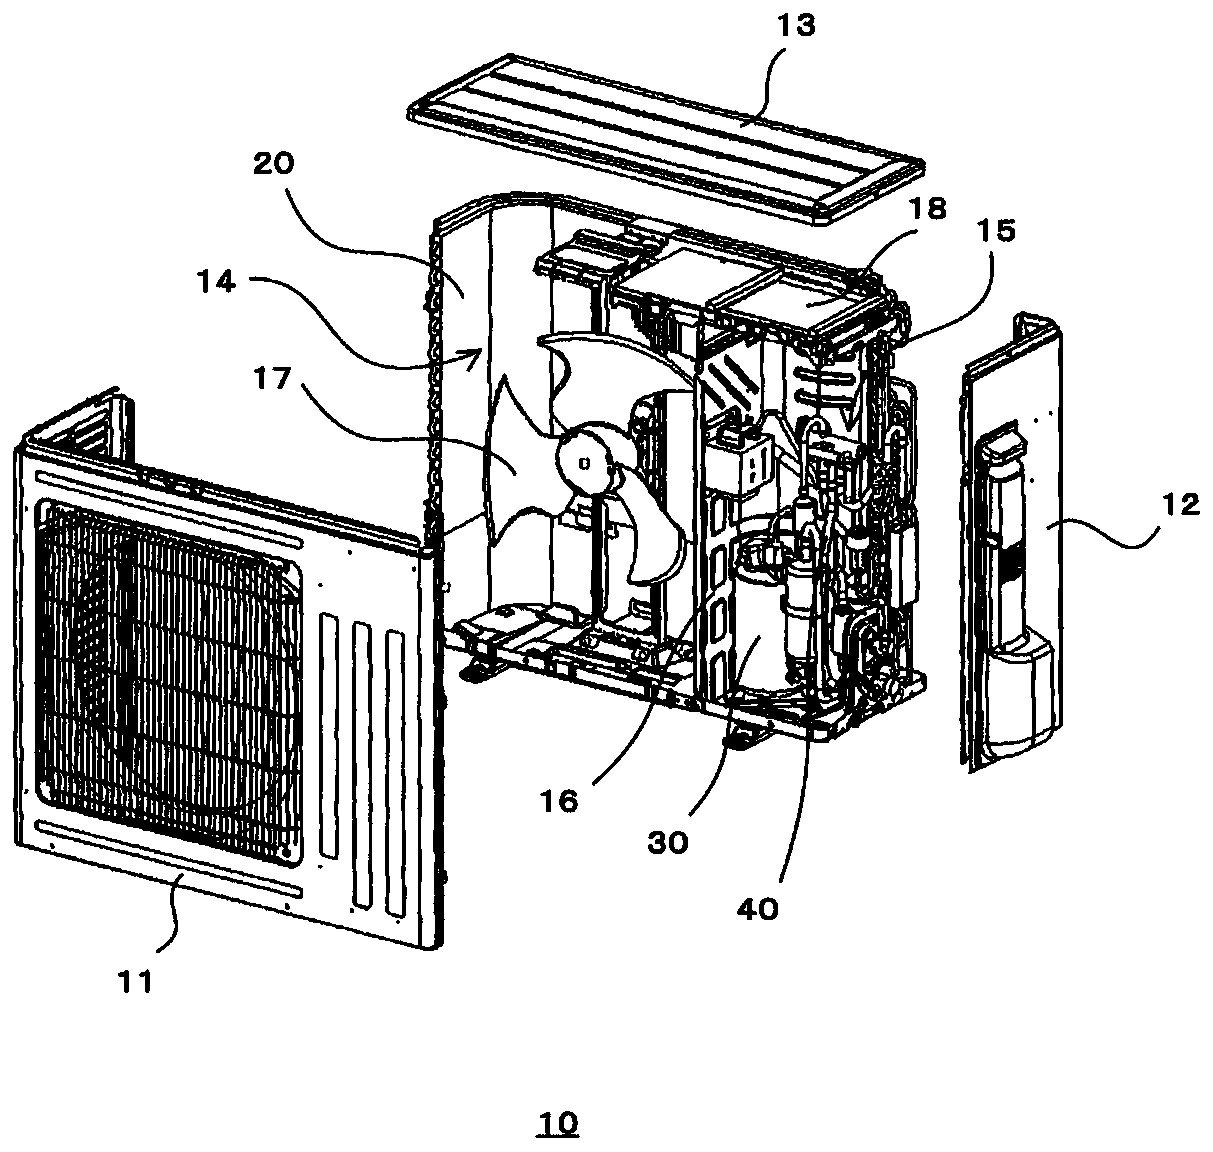 Heat exchange unit and refrigeration cycle device